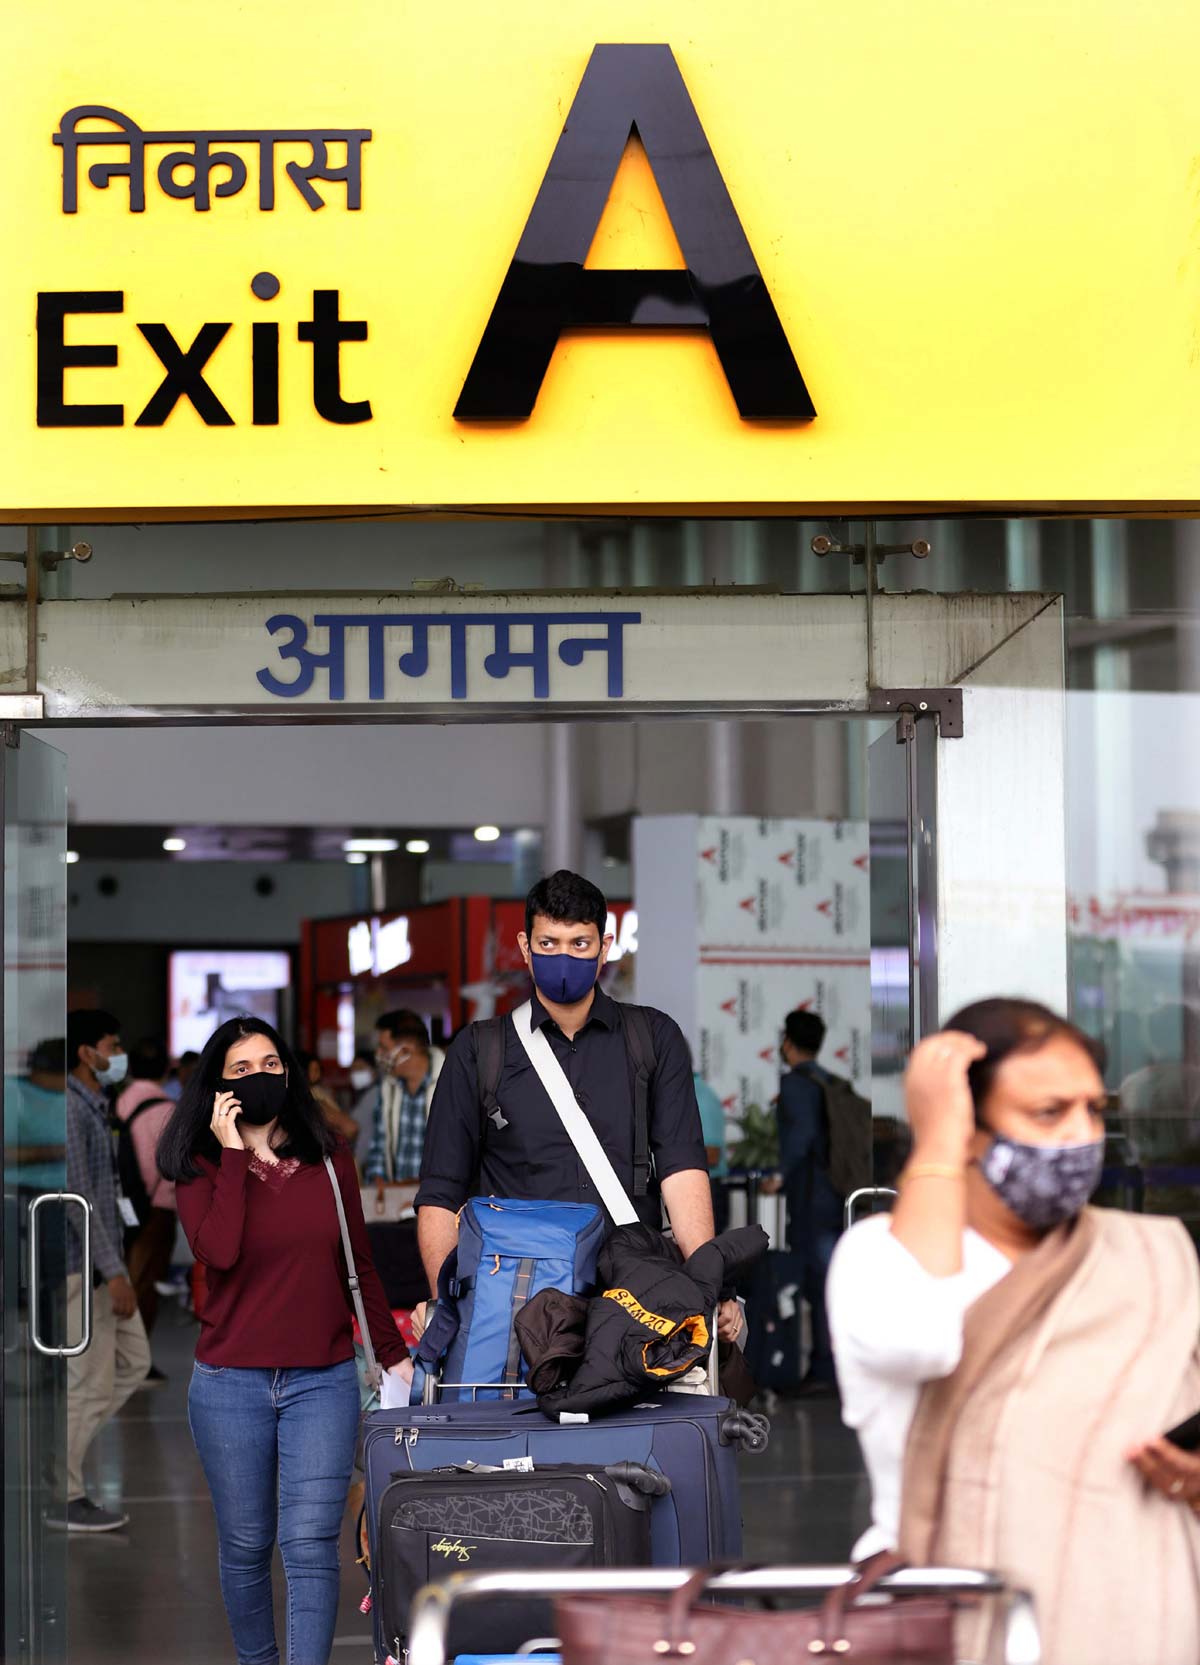 18 flyers from at-risk nations tested positive: Govt